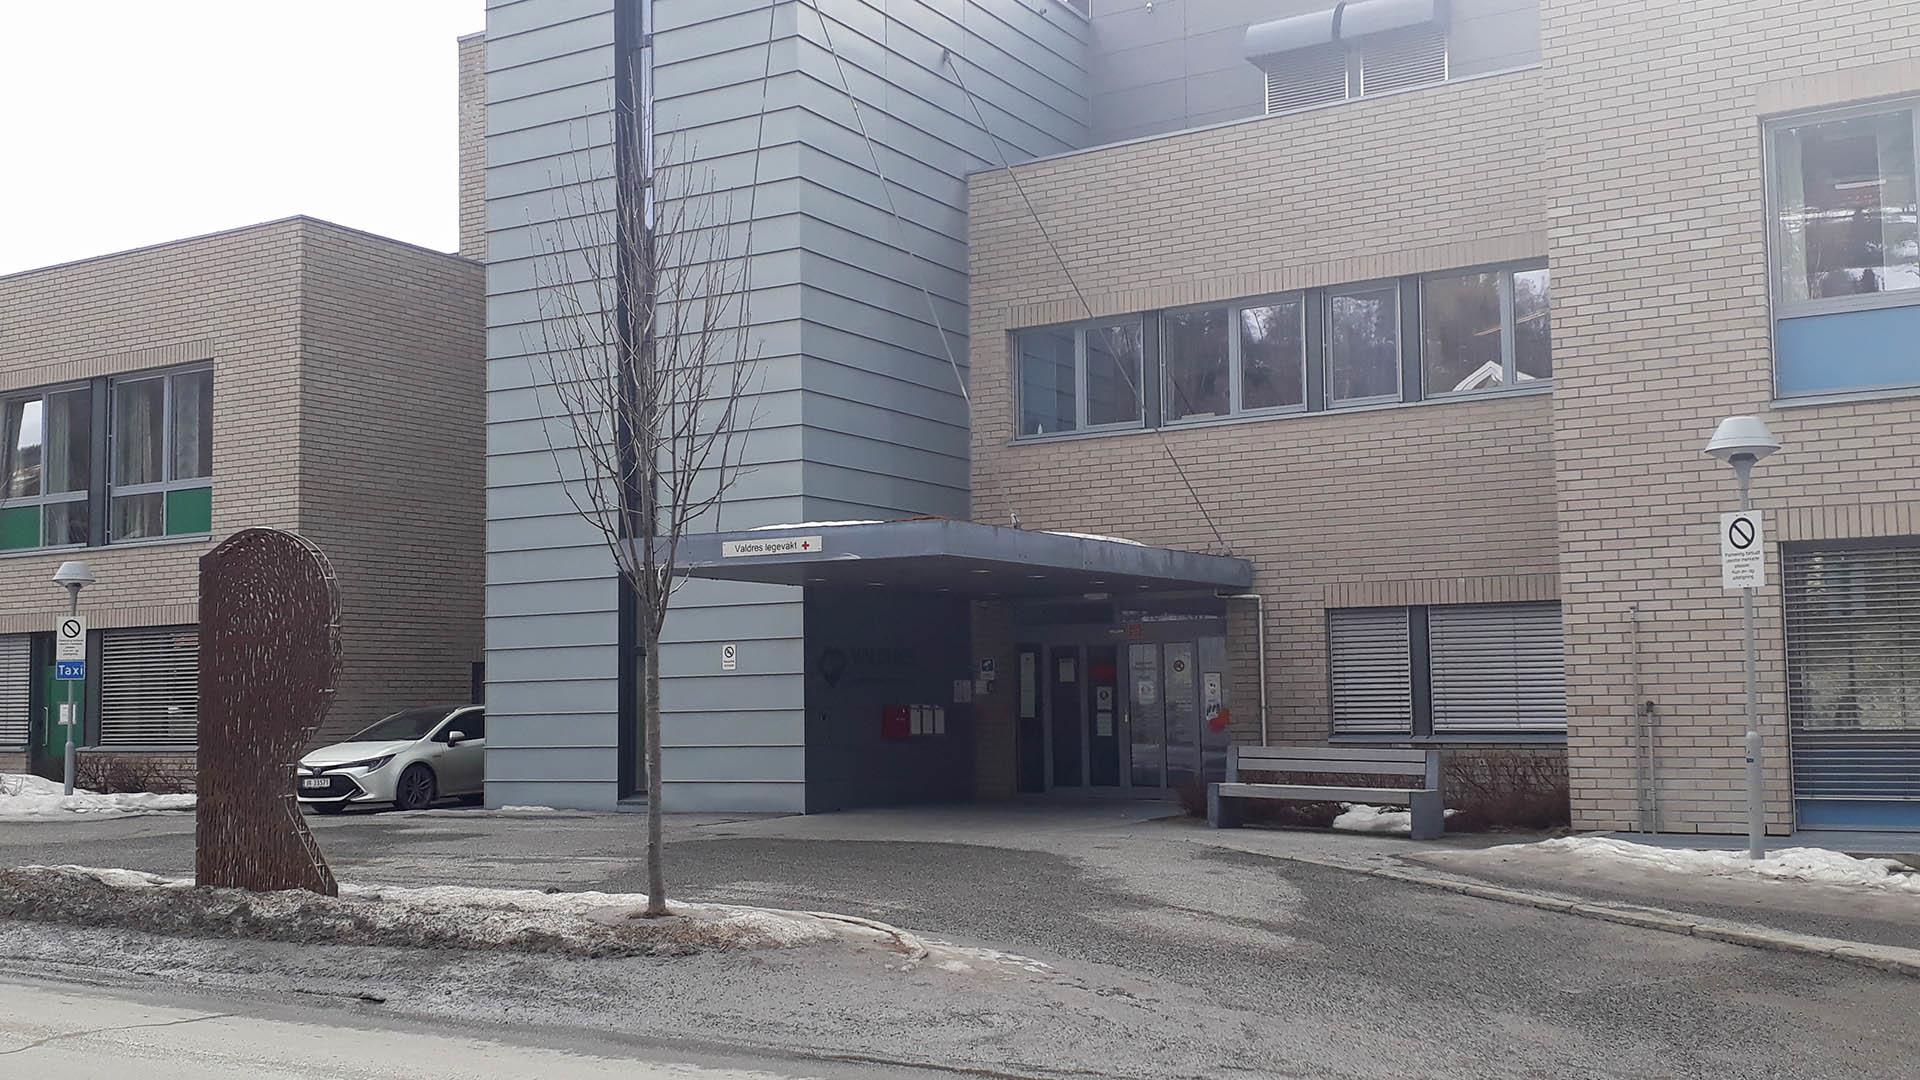 The local medical centre at Fagernes seen from outside.